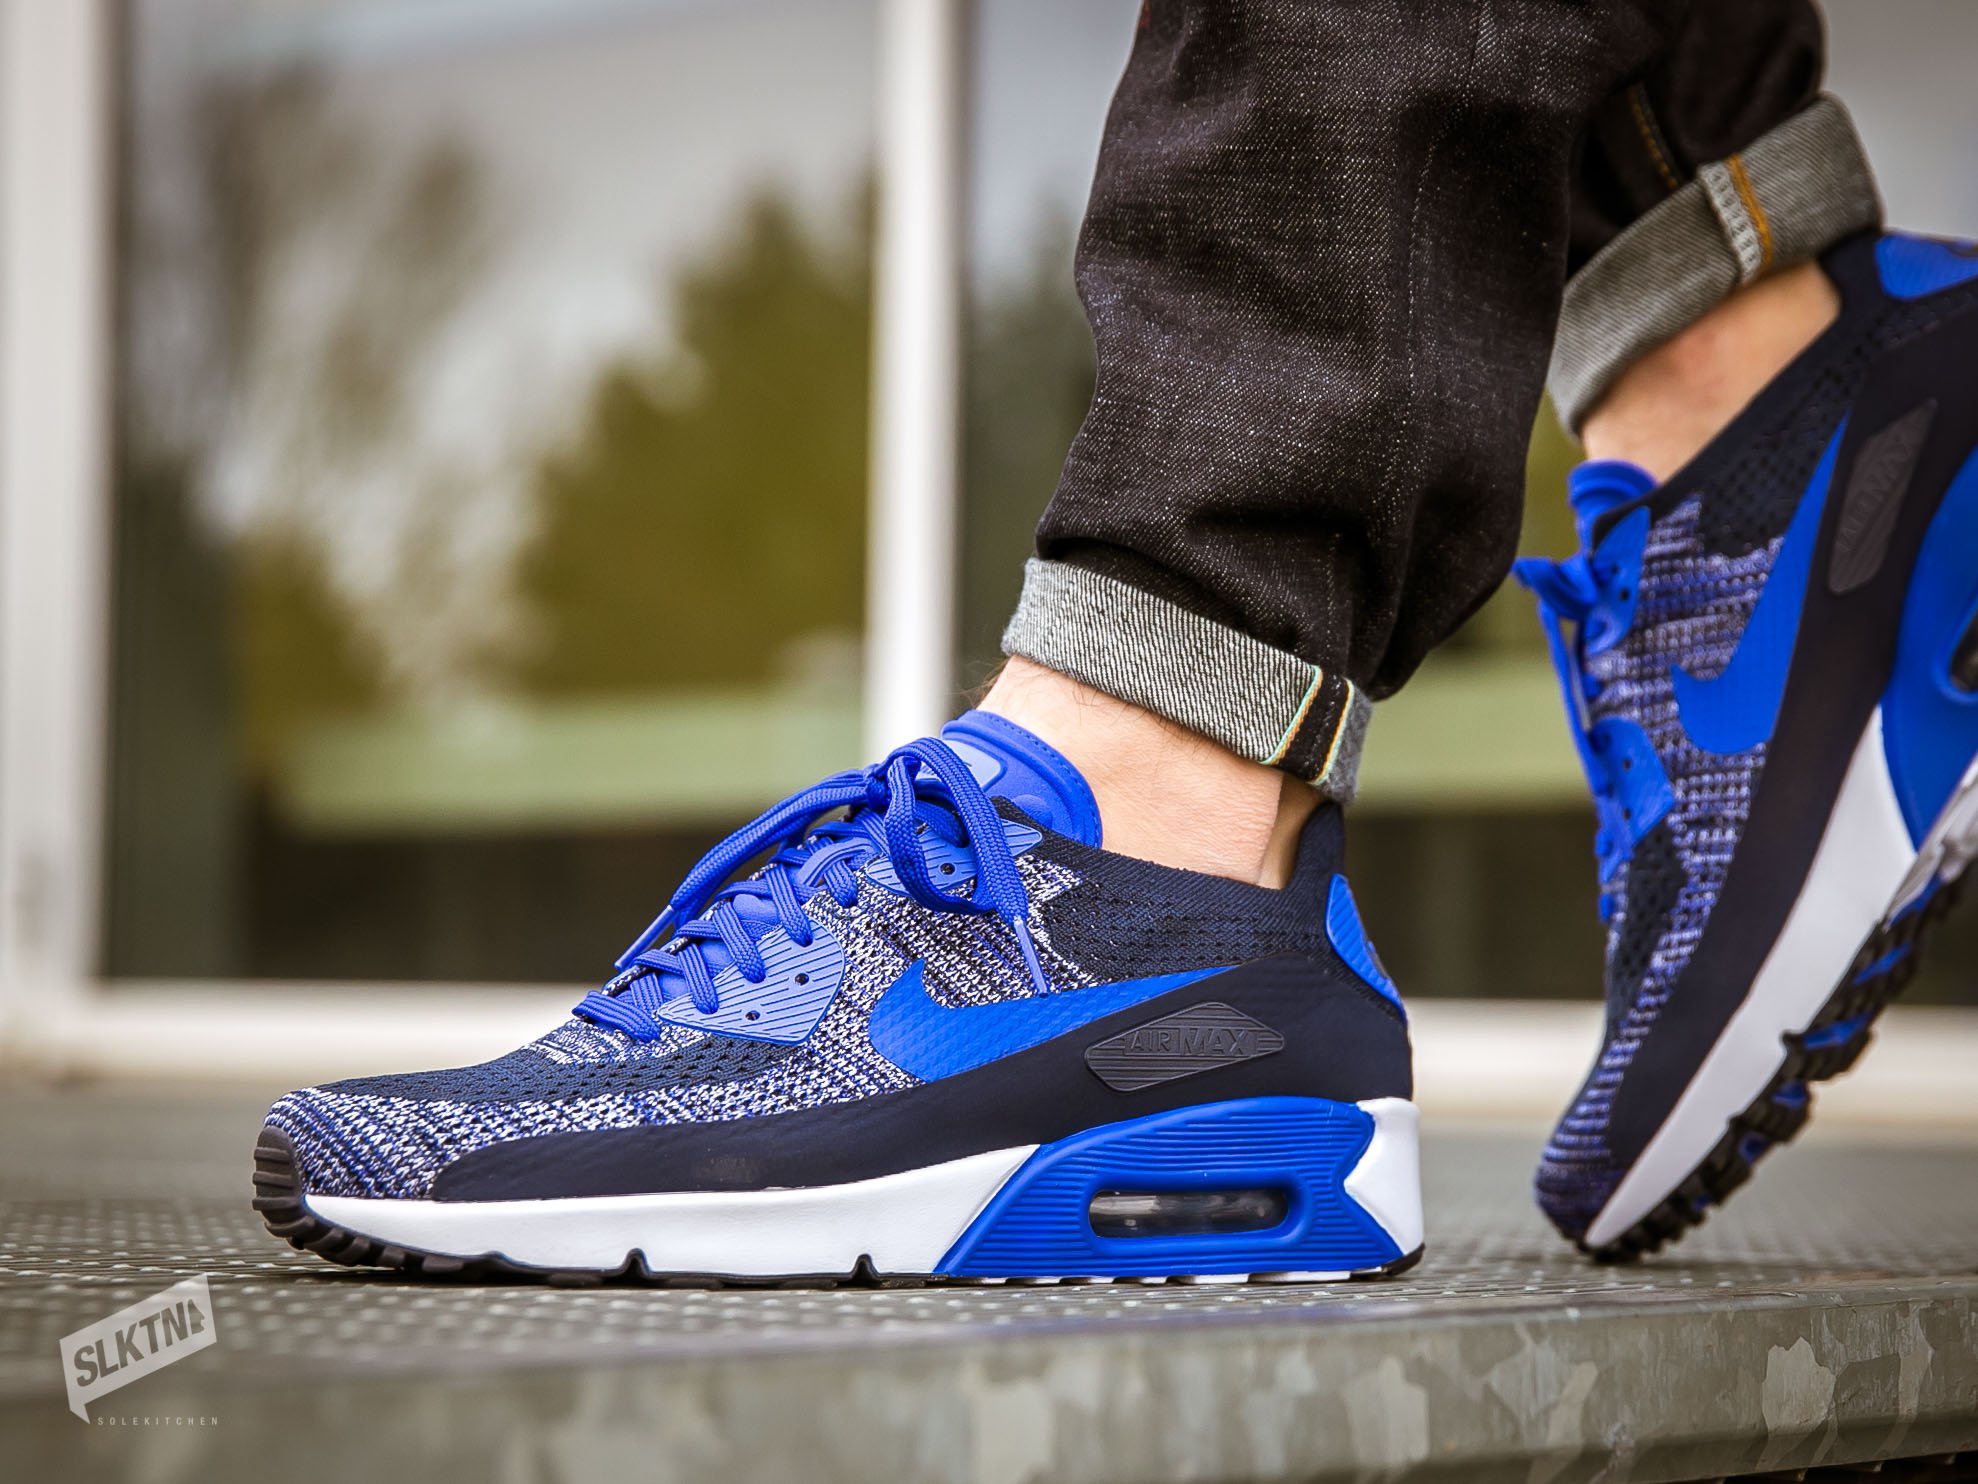 Nike Air Max 90 Ultra 2.0 "College Navy"